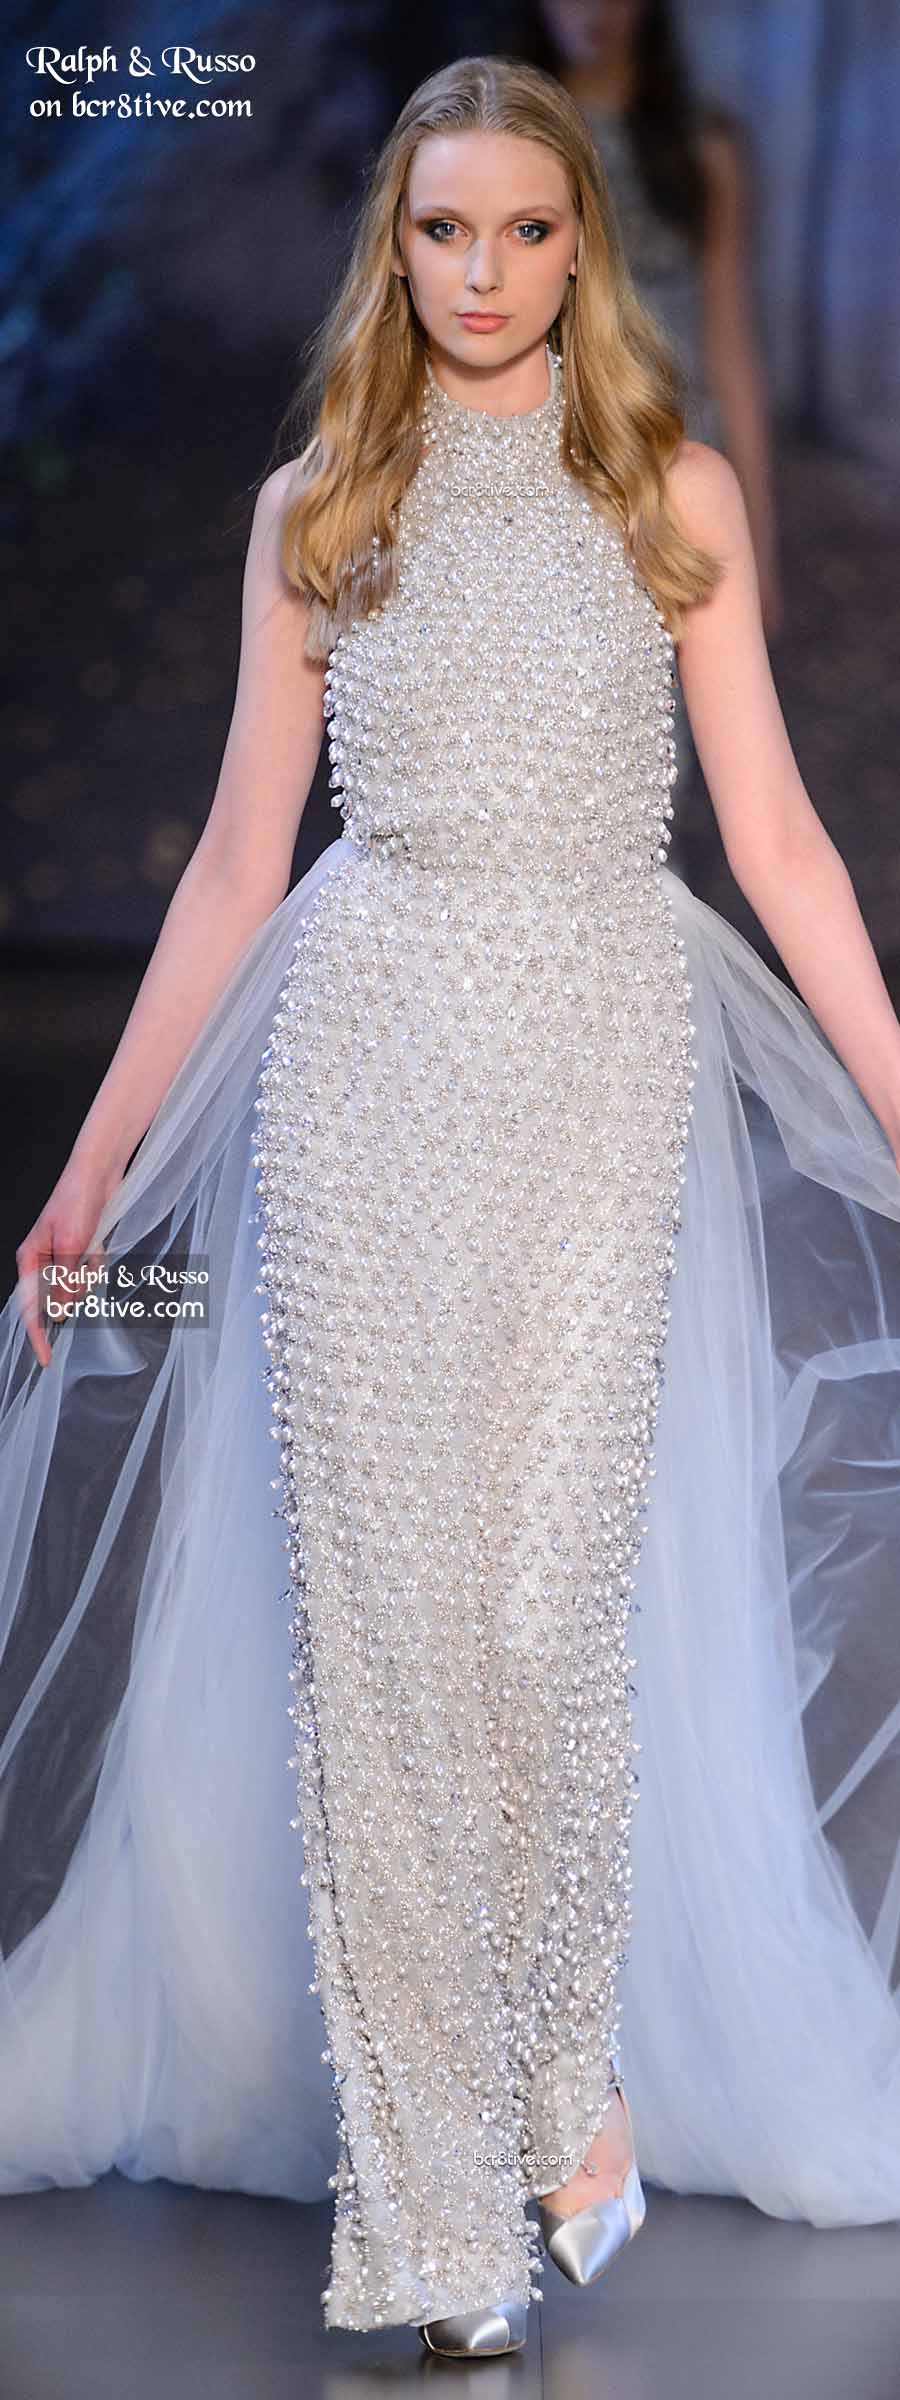 Ralph & Russo Haute Couture Fall 2015-16 Collection – Be Creative